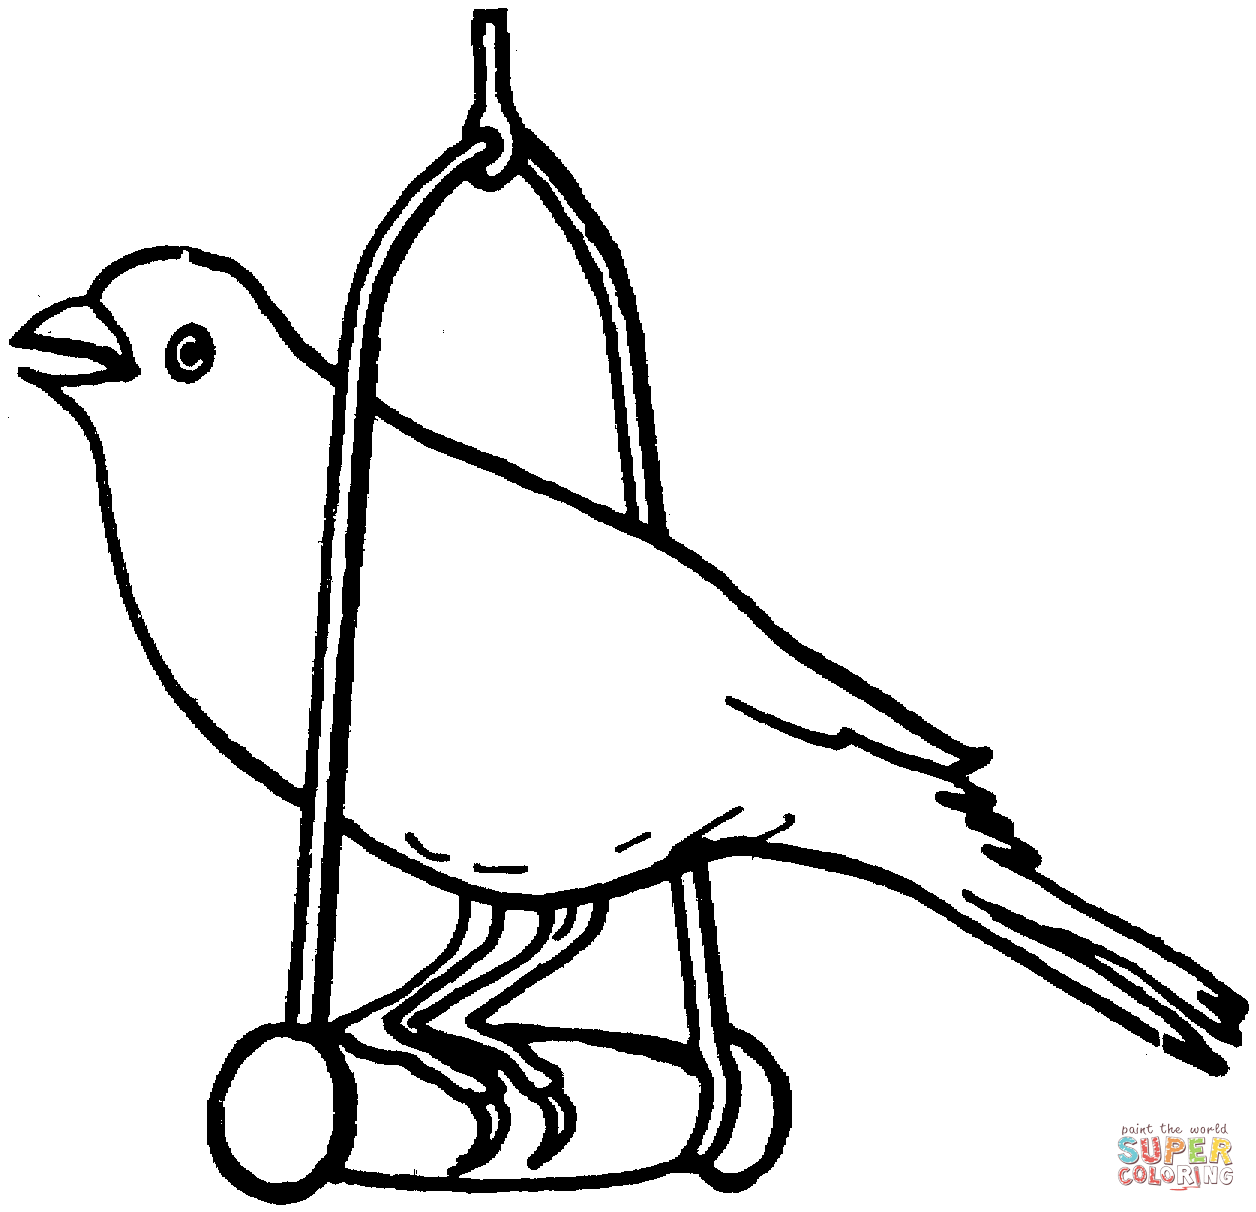 Canary bird coloring page | Free Printable Coloring Pages